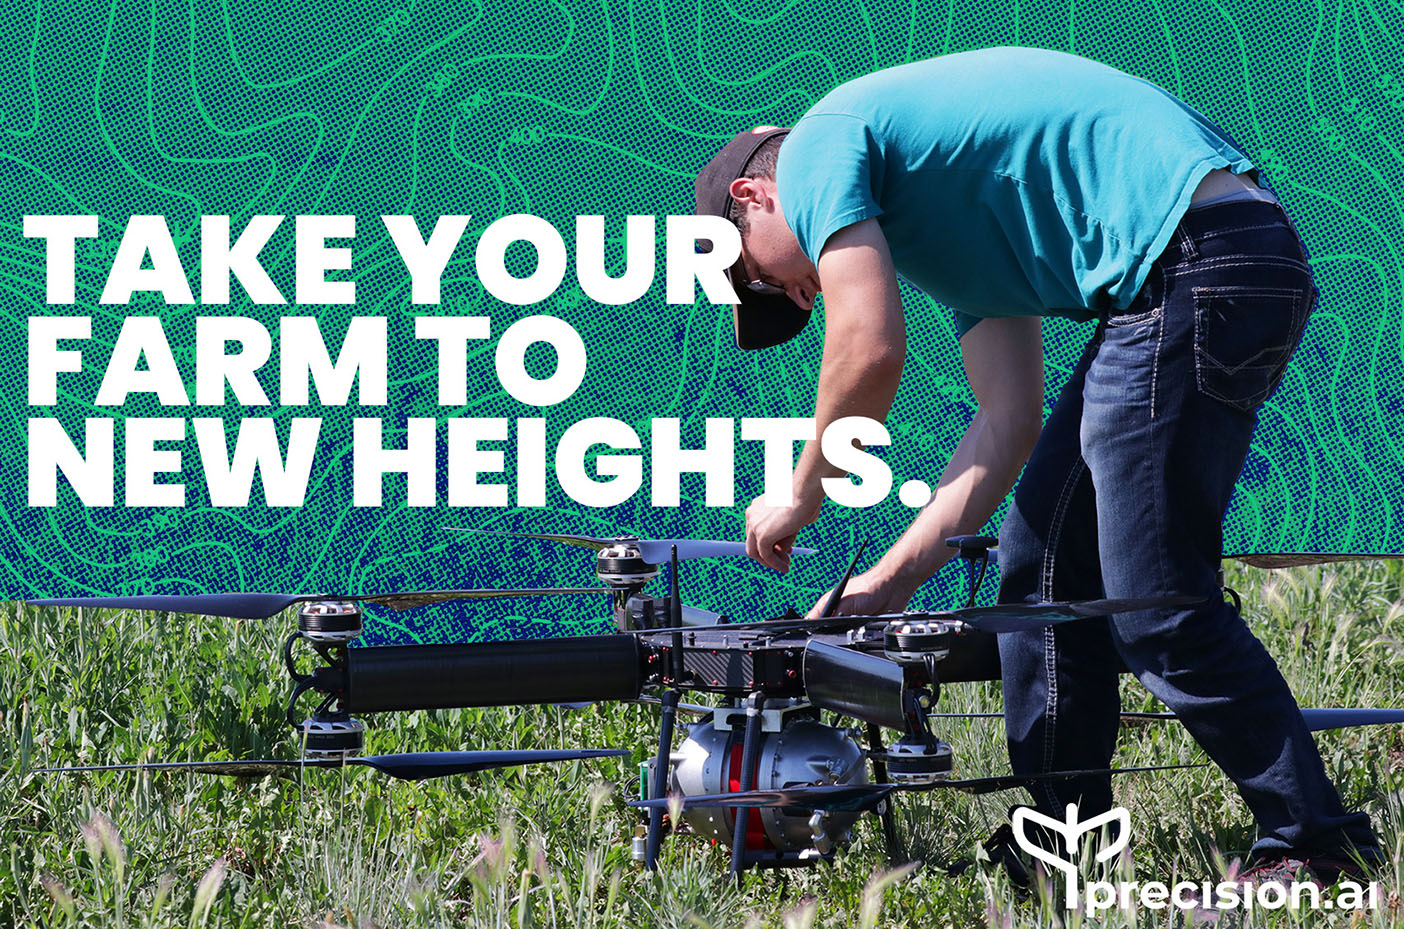 Each drone has a flight time of up to 55 minutes and can carry up to 25lbs / 11kg of payload.